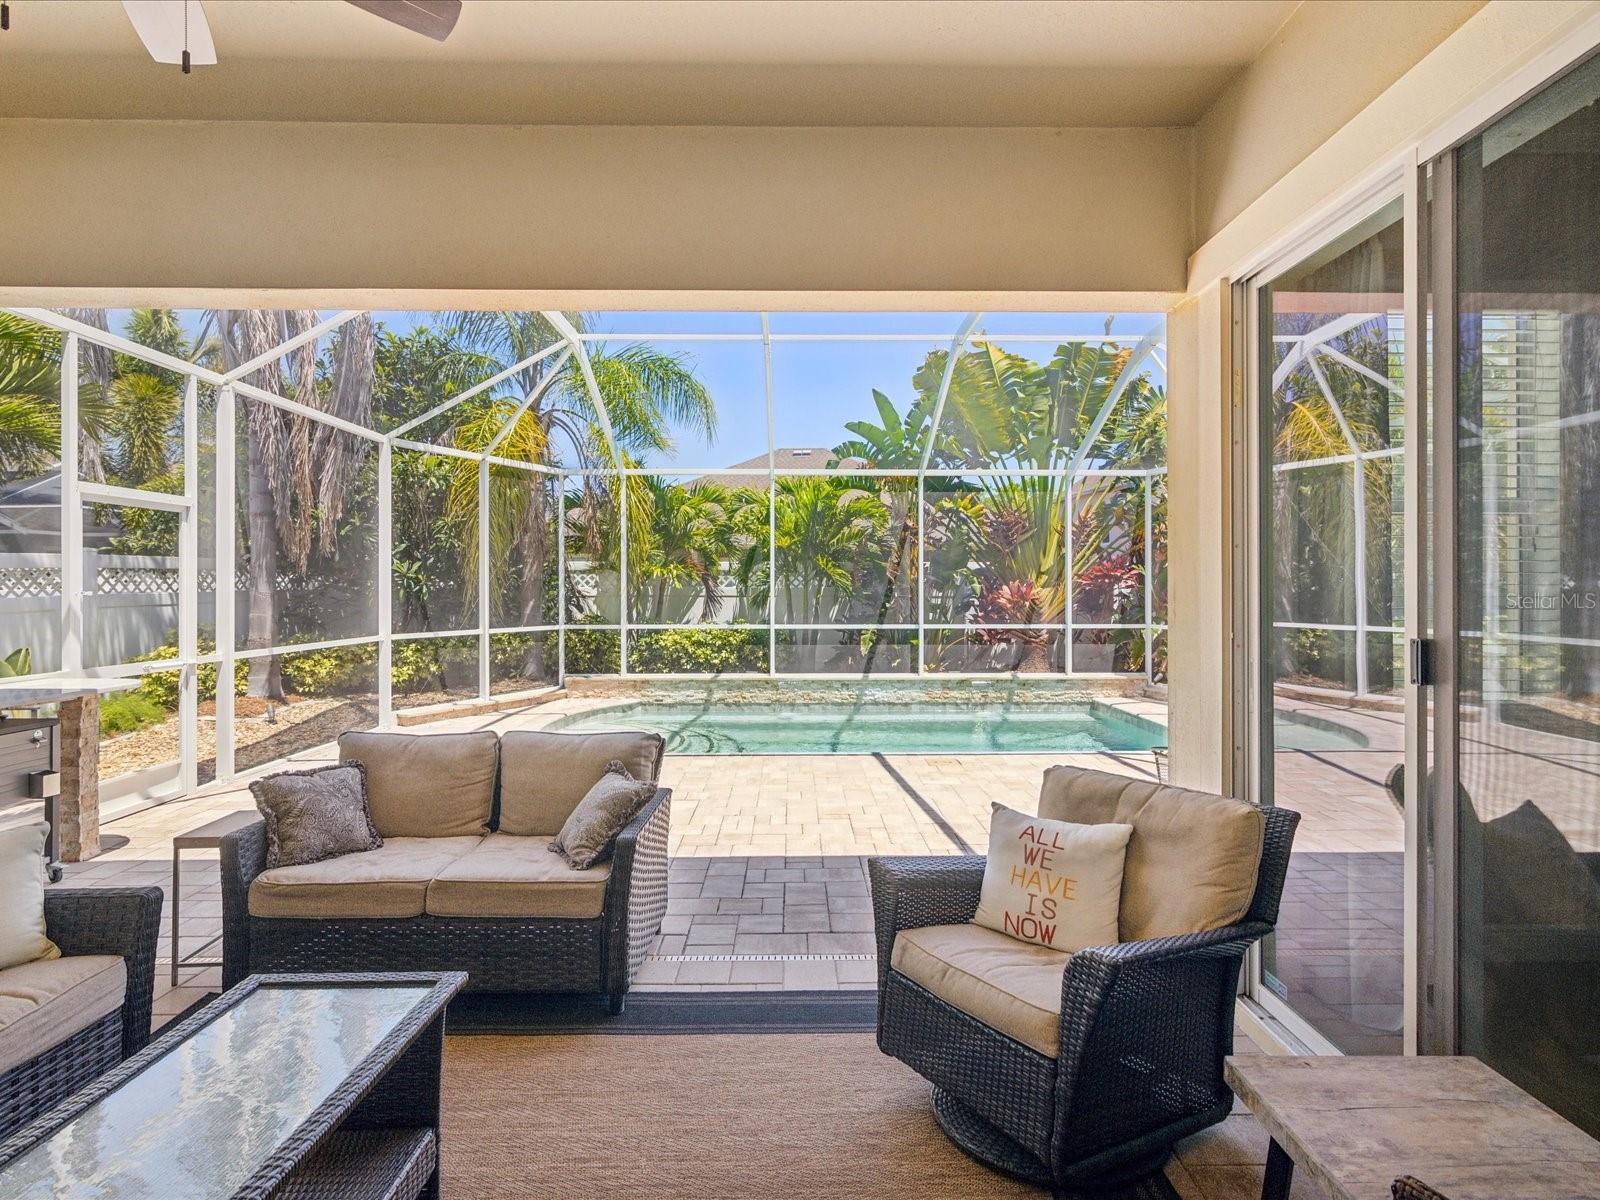 You will not have to worry about mosquitos in the enclosed pool and lounge area. Enjoy the morning sun and relaxing under the shade on a hot summer's day.